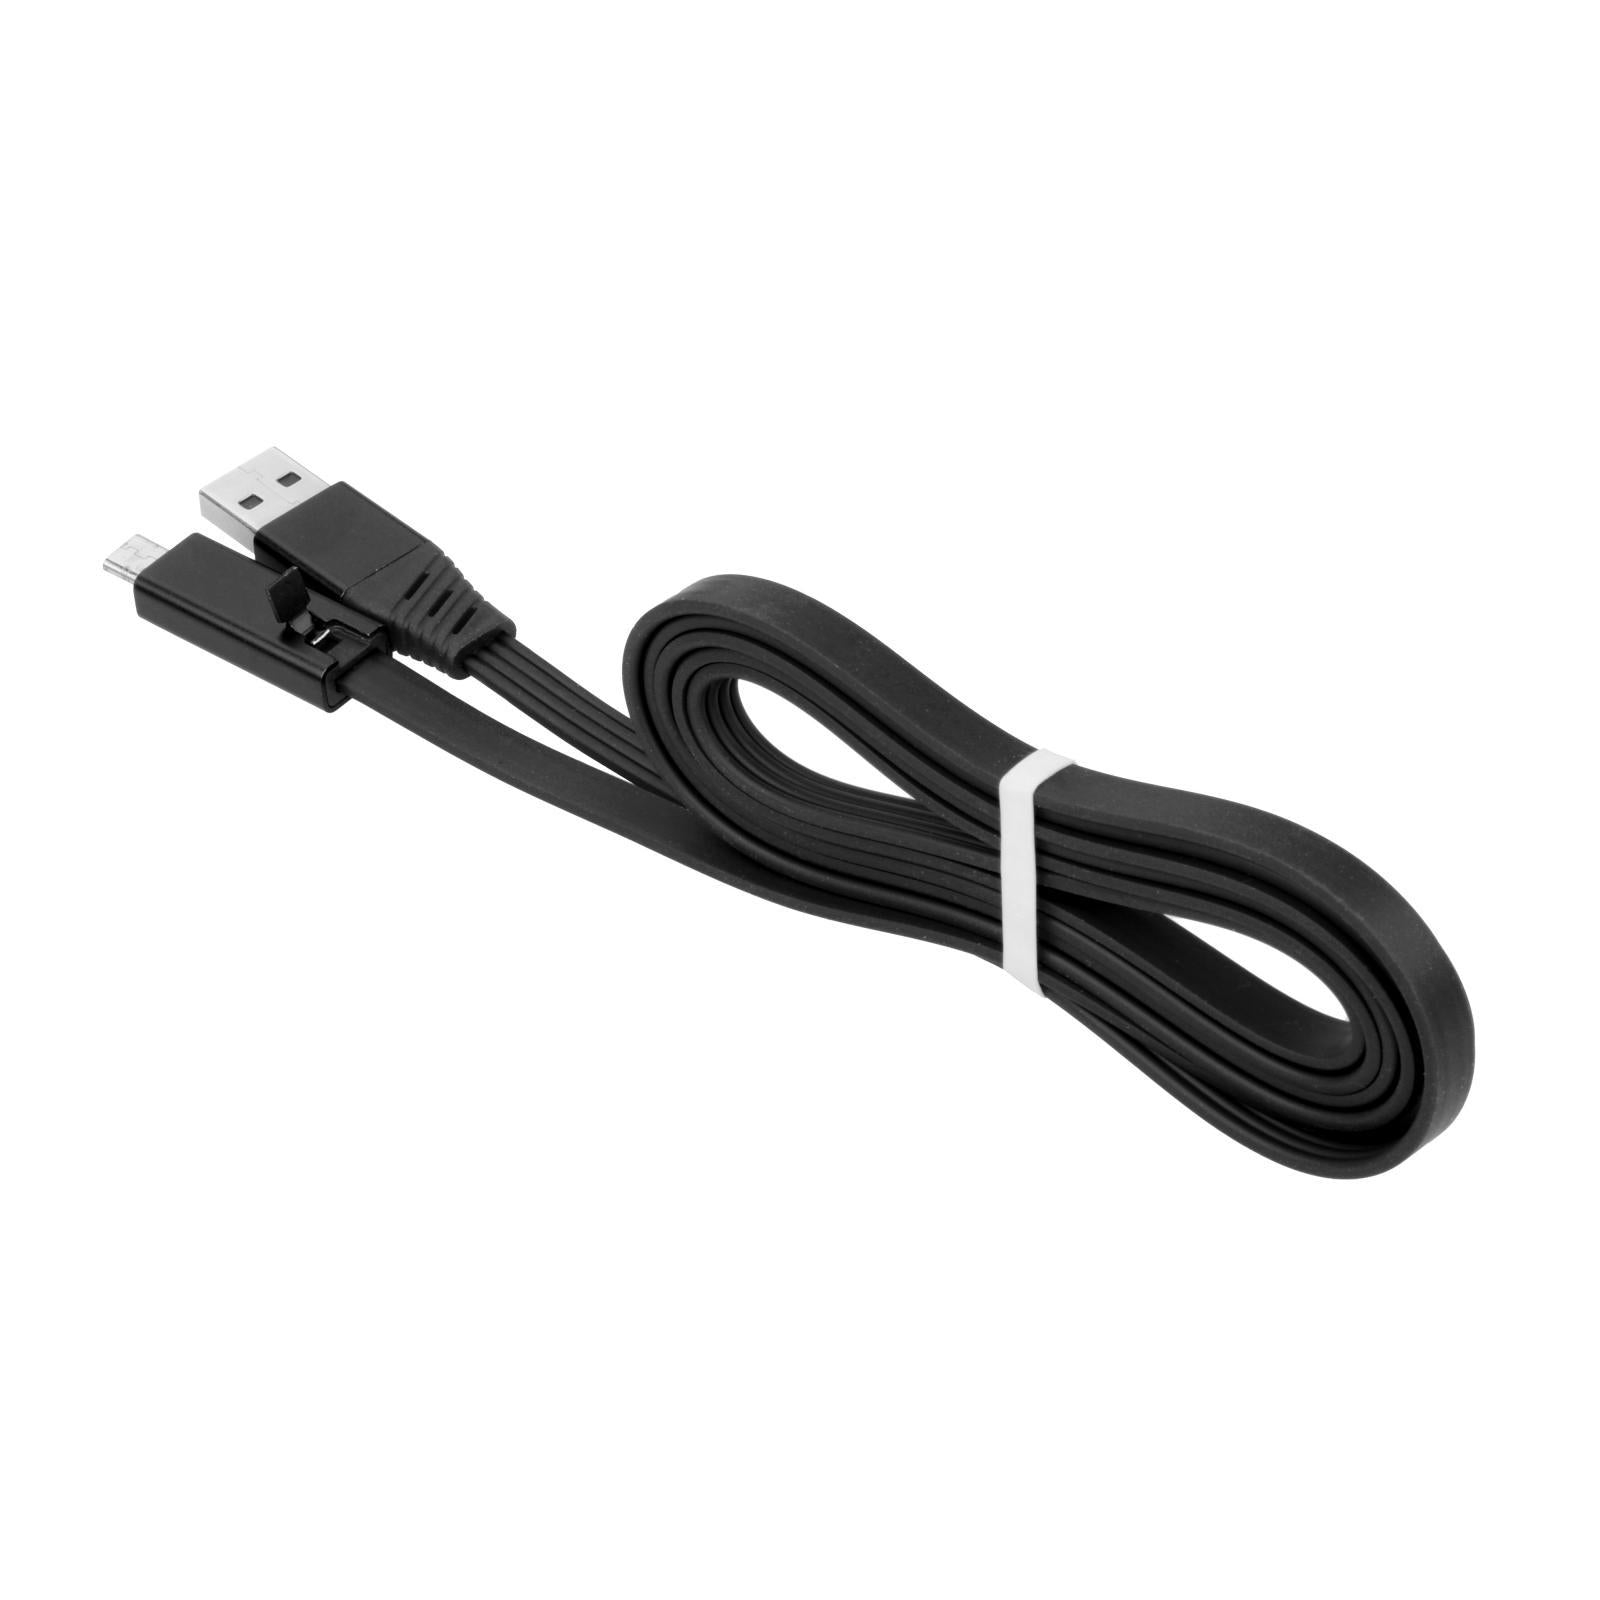 Reusable USB Date Cable 1.5m Recycling Data Sync Cord Micro USB Black